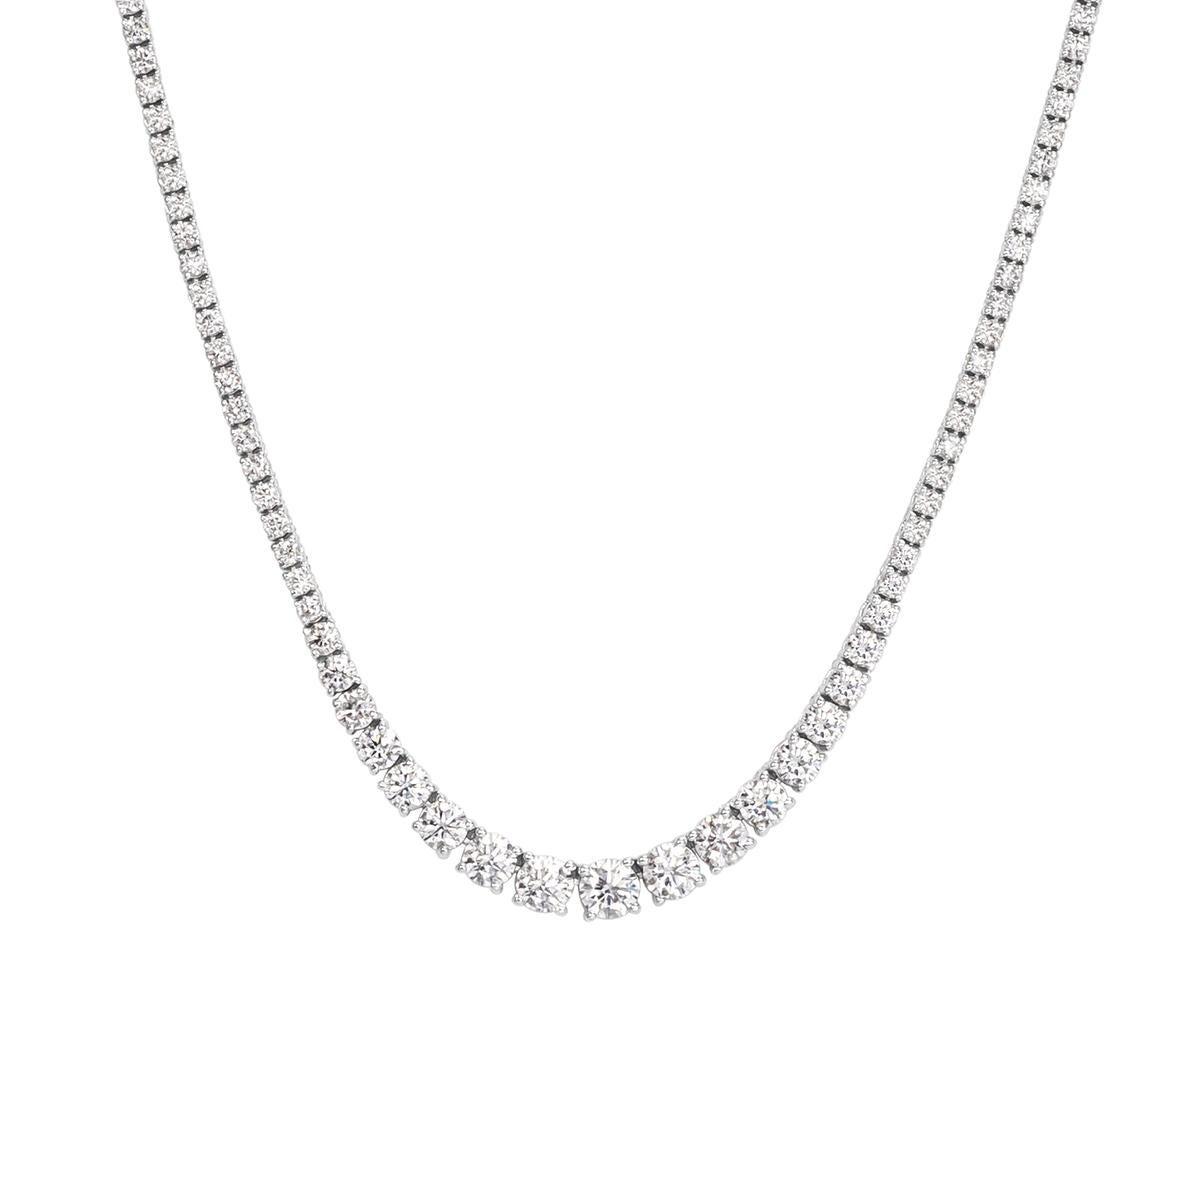 This gorgeous diamond tennis necklace showcases 7.75 ct of round brilliant cut diamonds arranged in a custom graduating setting style. They are remarquably white and sparkle tremendously! They are graded at F-G in color, VS2-SI2 in clarity and set